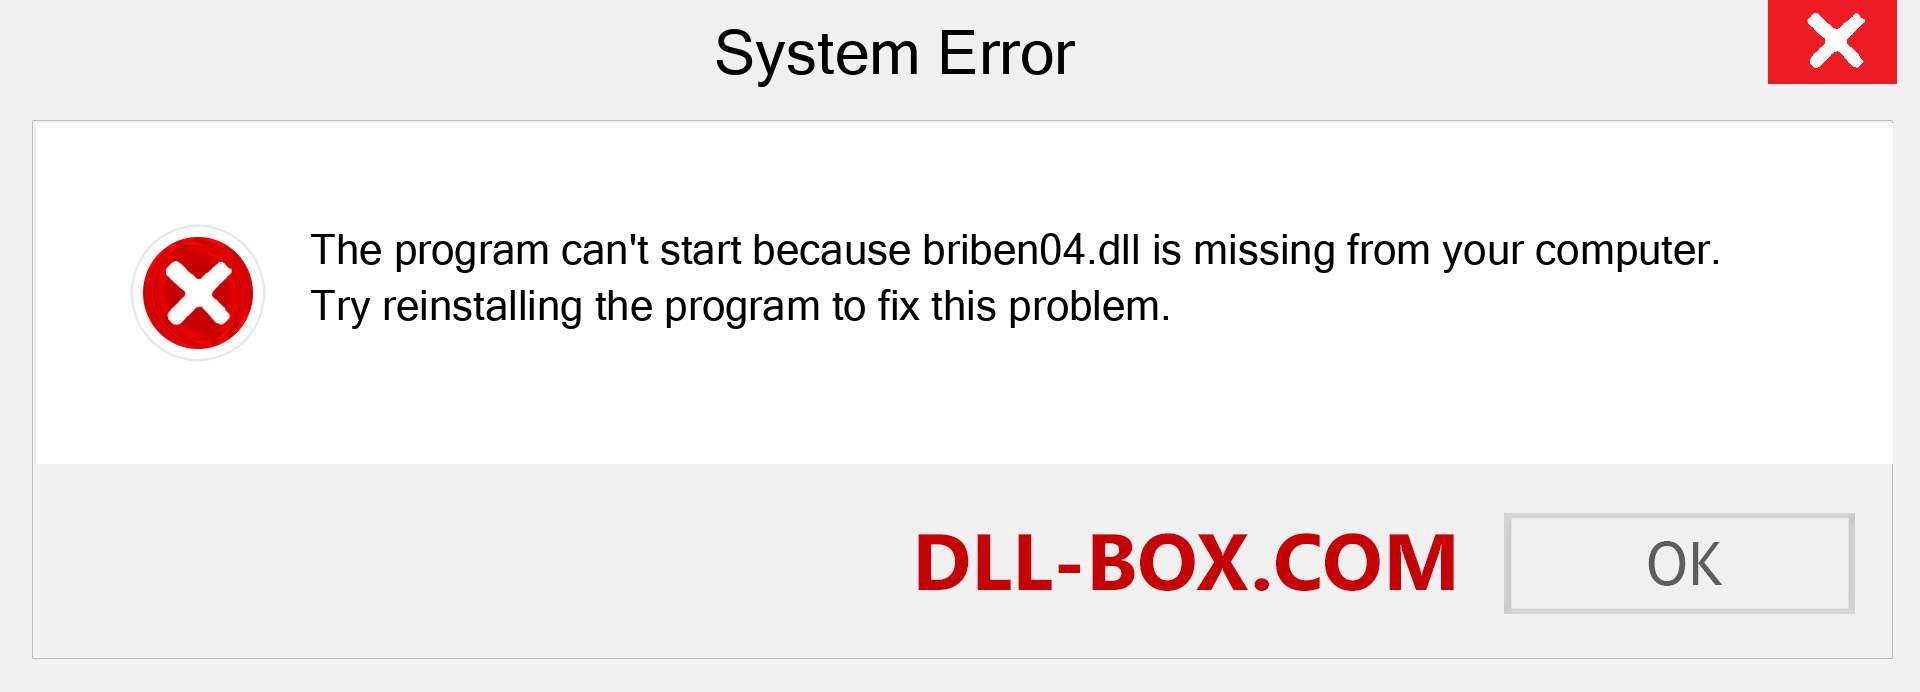  briben04.dll file is missing?. Download for Windows 7, 8, 10 - Fix  briben04 dll Missing Error on Windows, photos, images